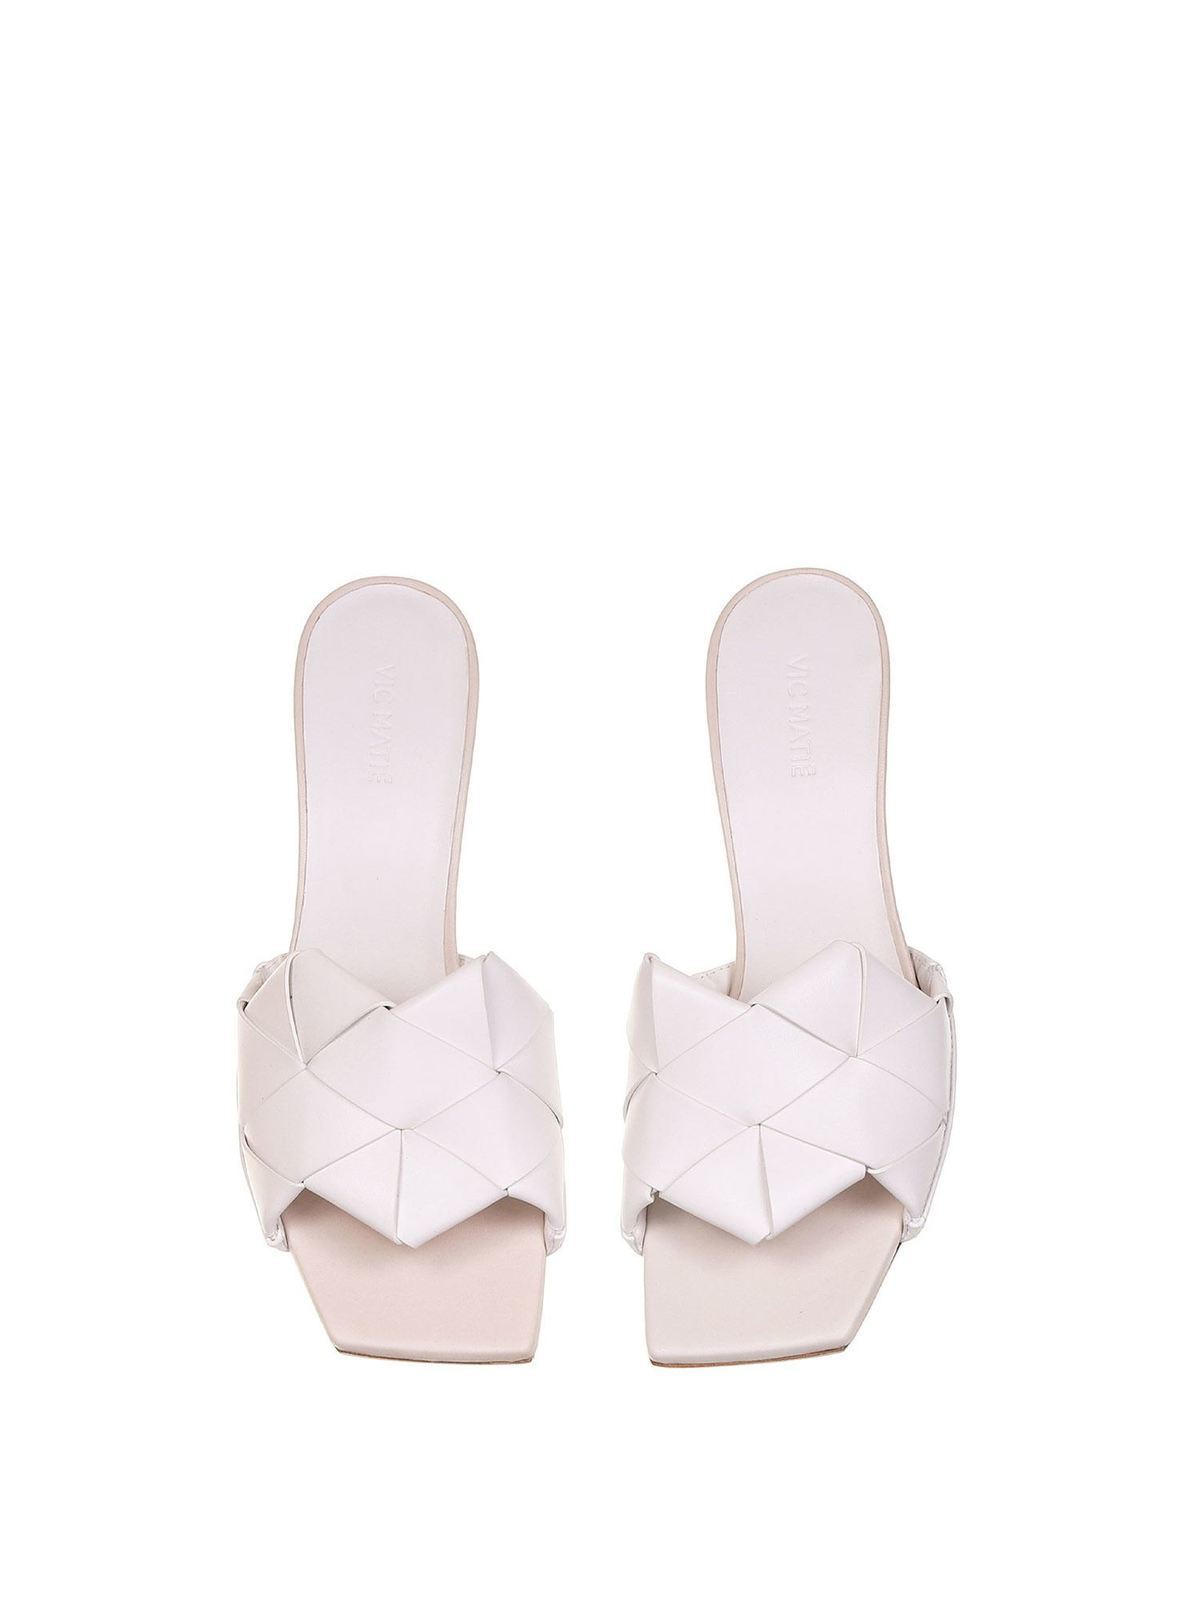 Sandals Vic Matiè - Maxi woven band sandals in white - 1Z5800DGANGEE110